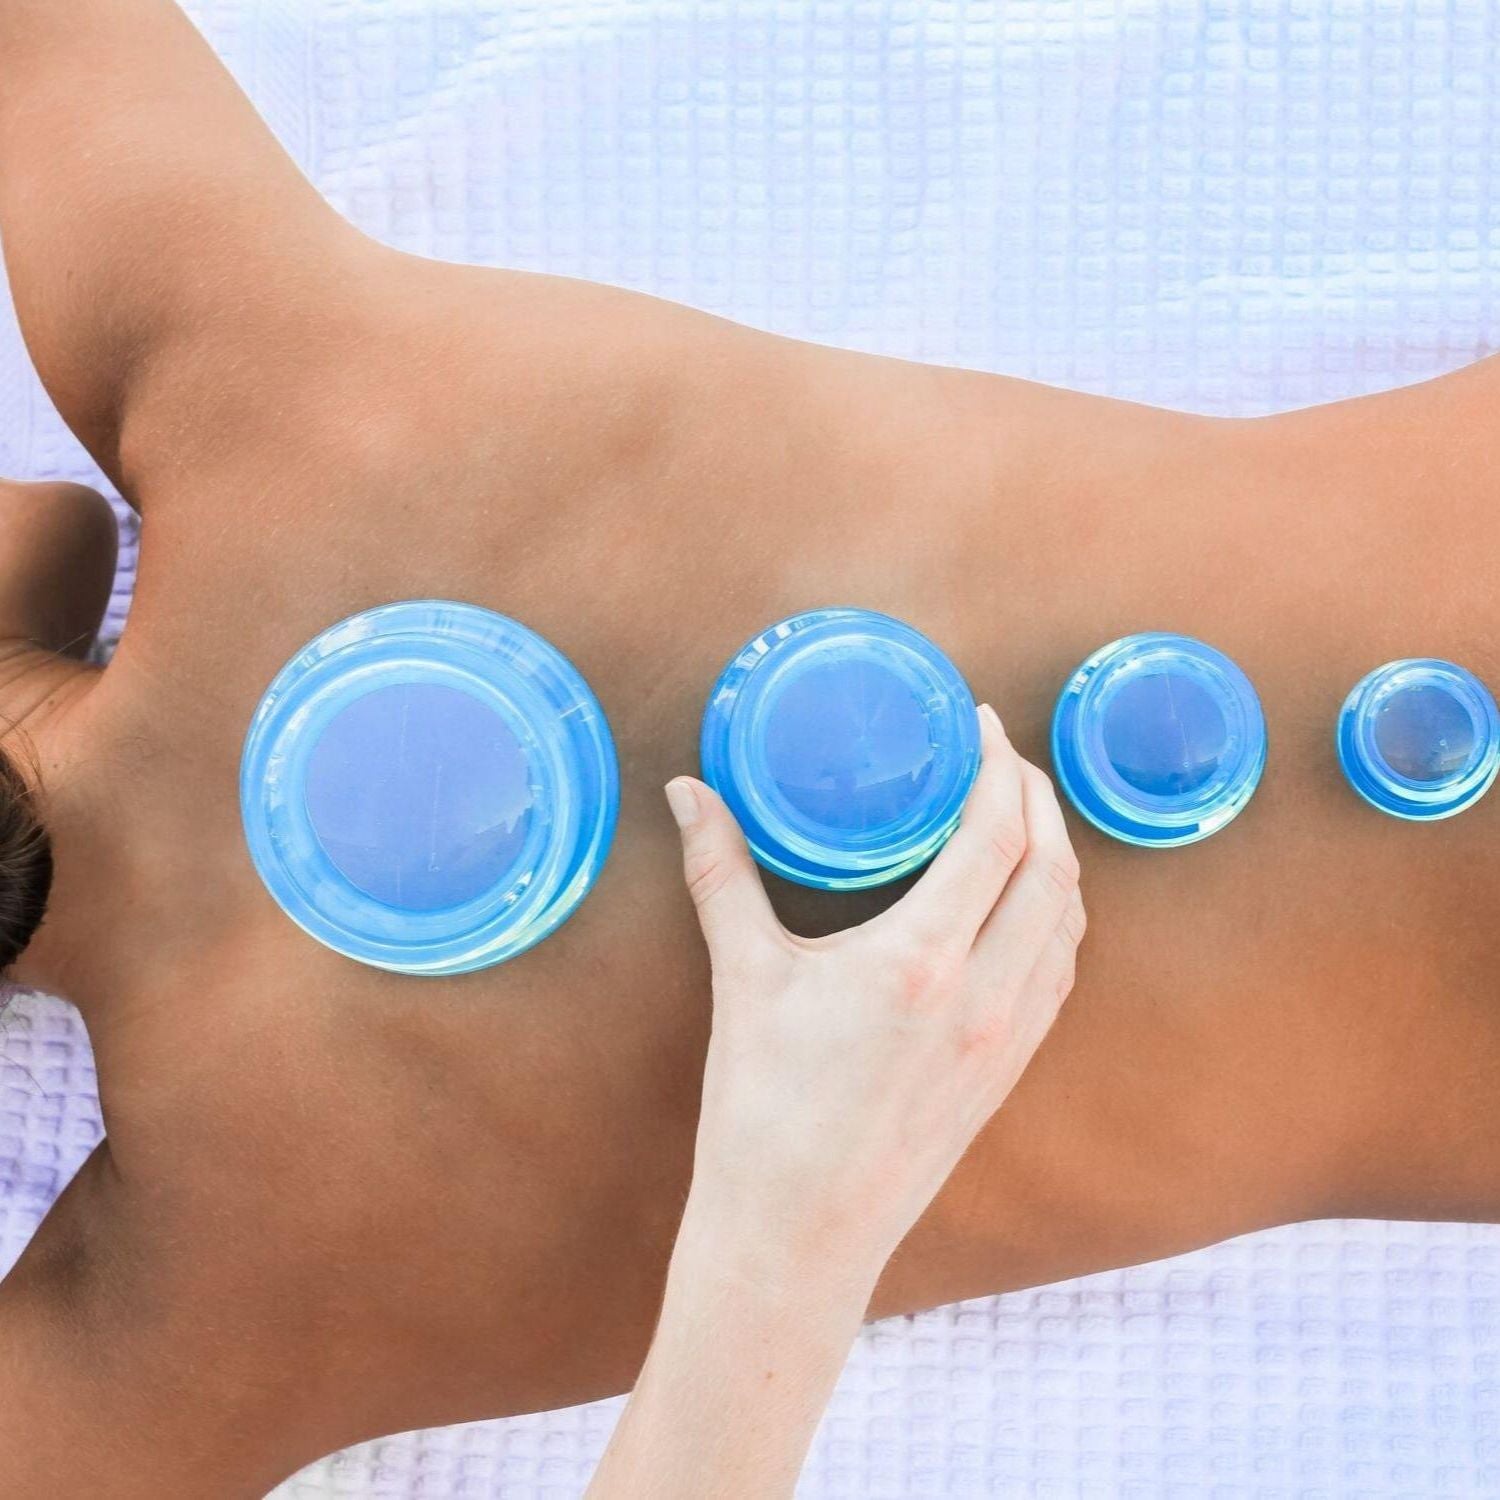 Lure Essentials Cupping Therapy Set - The Most Recommended Massage System  for Muscle Soreness, Pain Relief, Injury Recovery, Toning & Cellulite